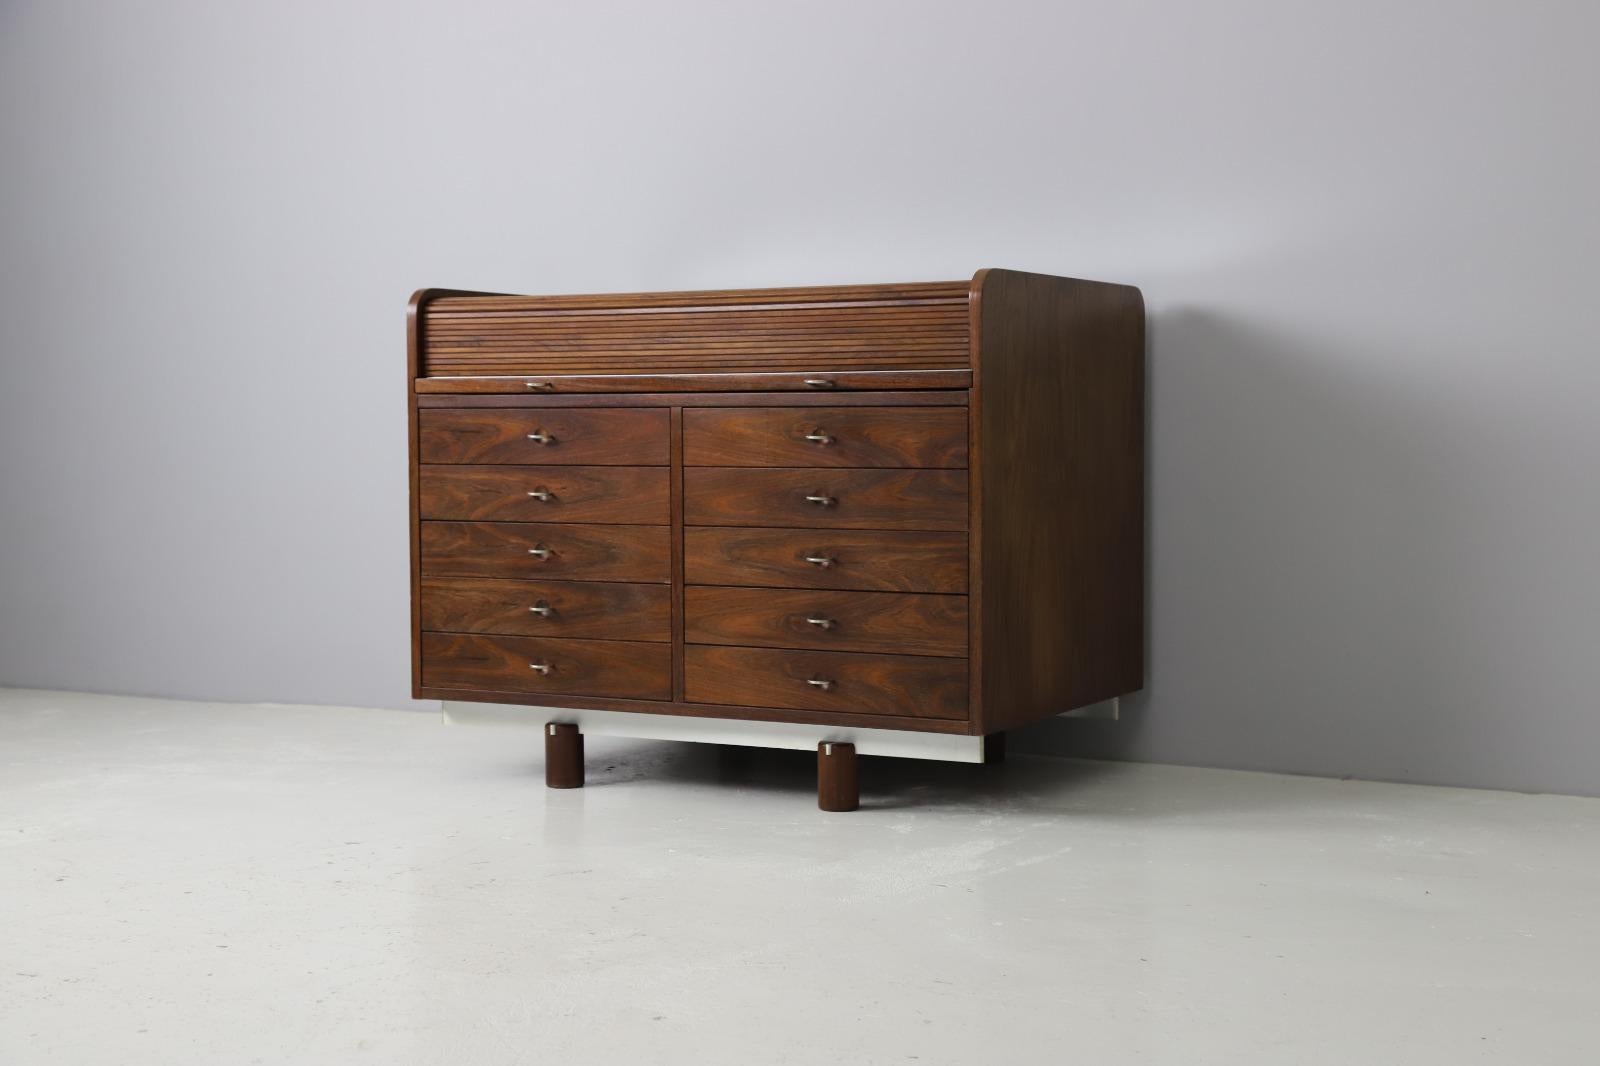 Model 804 roll top secretary designed by Gianfranco Frattini, produced by Bernini, Italy 1962. By pulling the two upper pulls you will access the hidden working space with a leather desk top and small rosewood drawers. This writing desk can be used